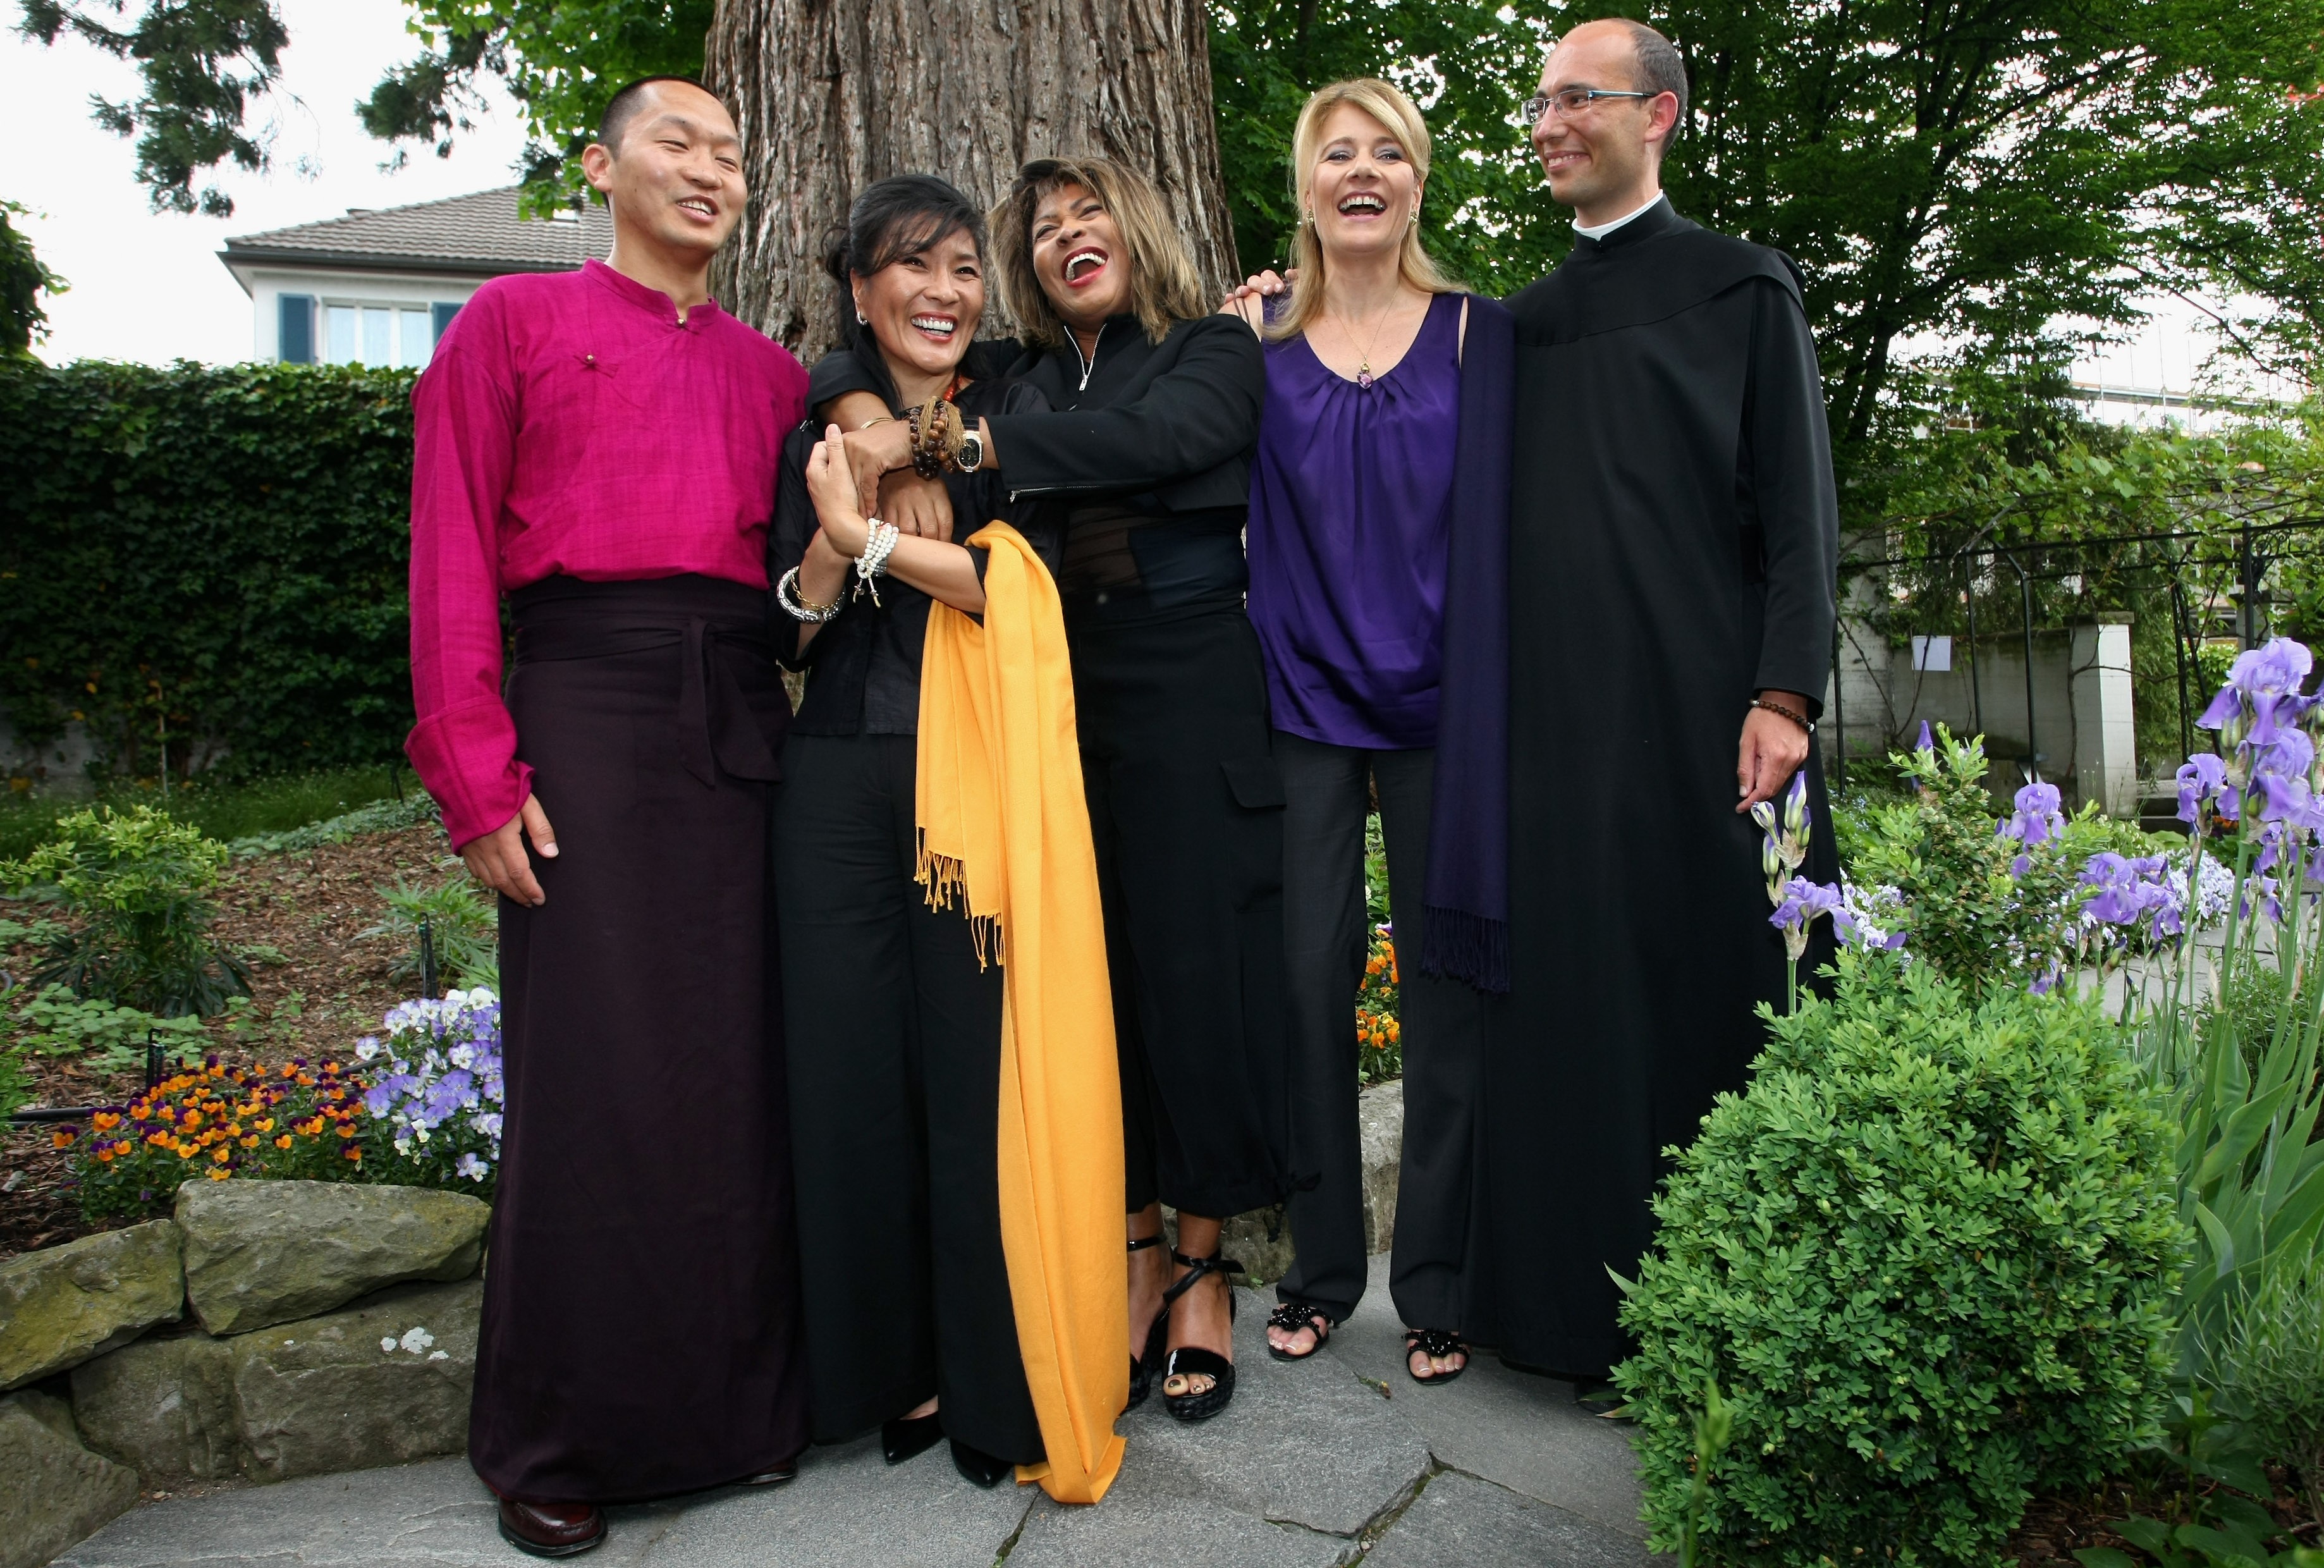 Buddhist Loten Dahortsang, vocalist Dechen Shak-Dagsay, Tina Turner, vocalist Regula Curti and monk Jean Sebastien Cheriere posing for a picture at the "Beyond - Three Voices For Peace" music presentation in Zürich, 2009 | Source: Getty Images